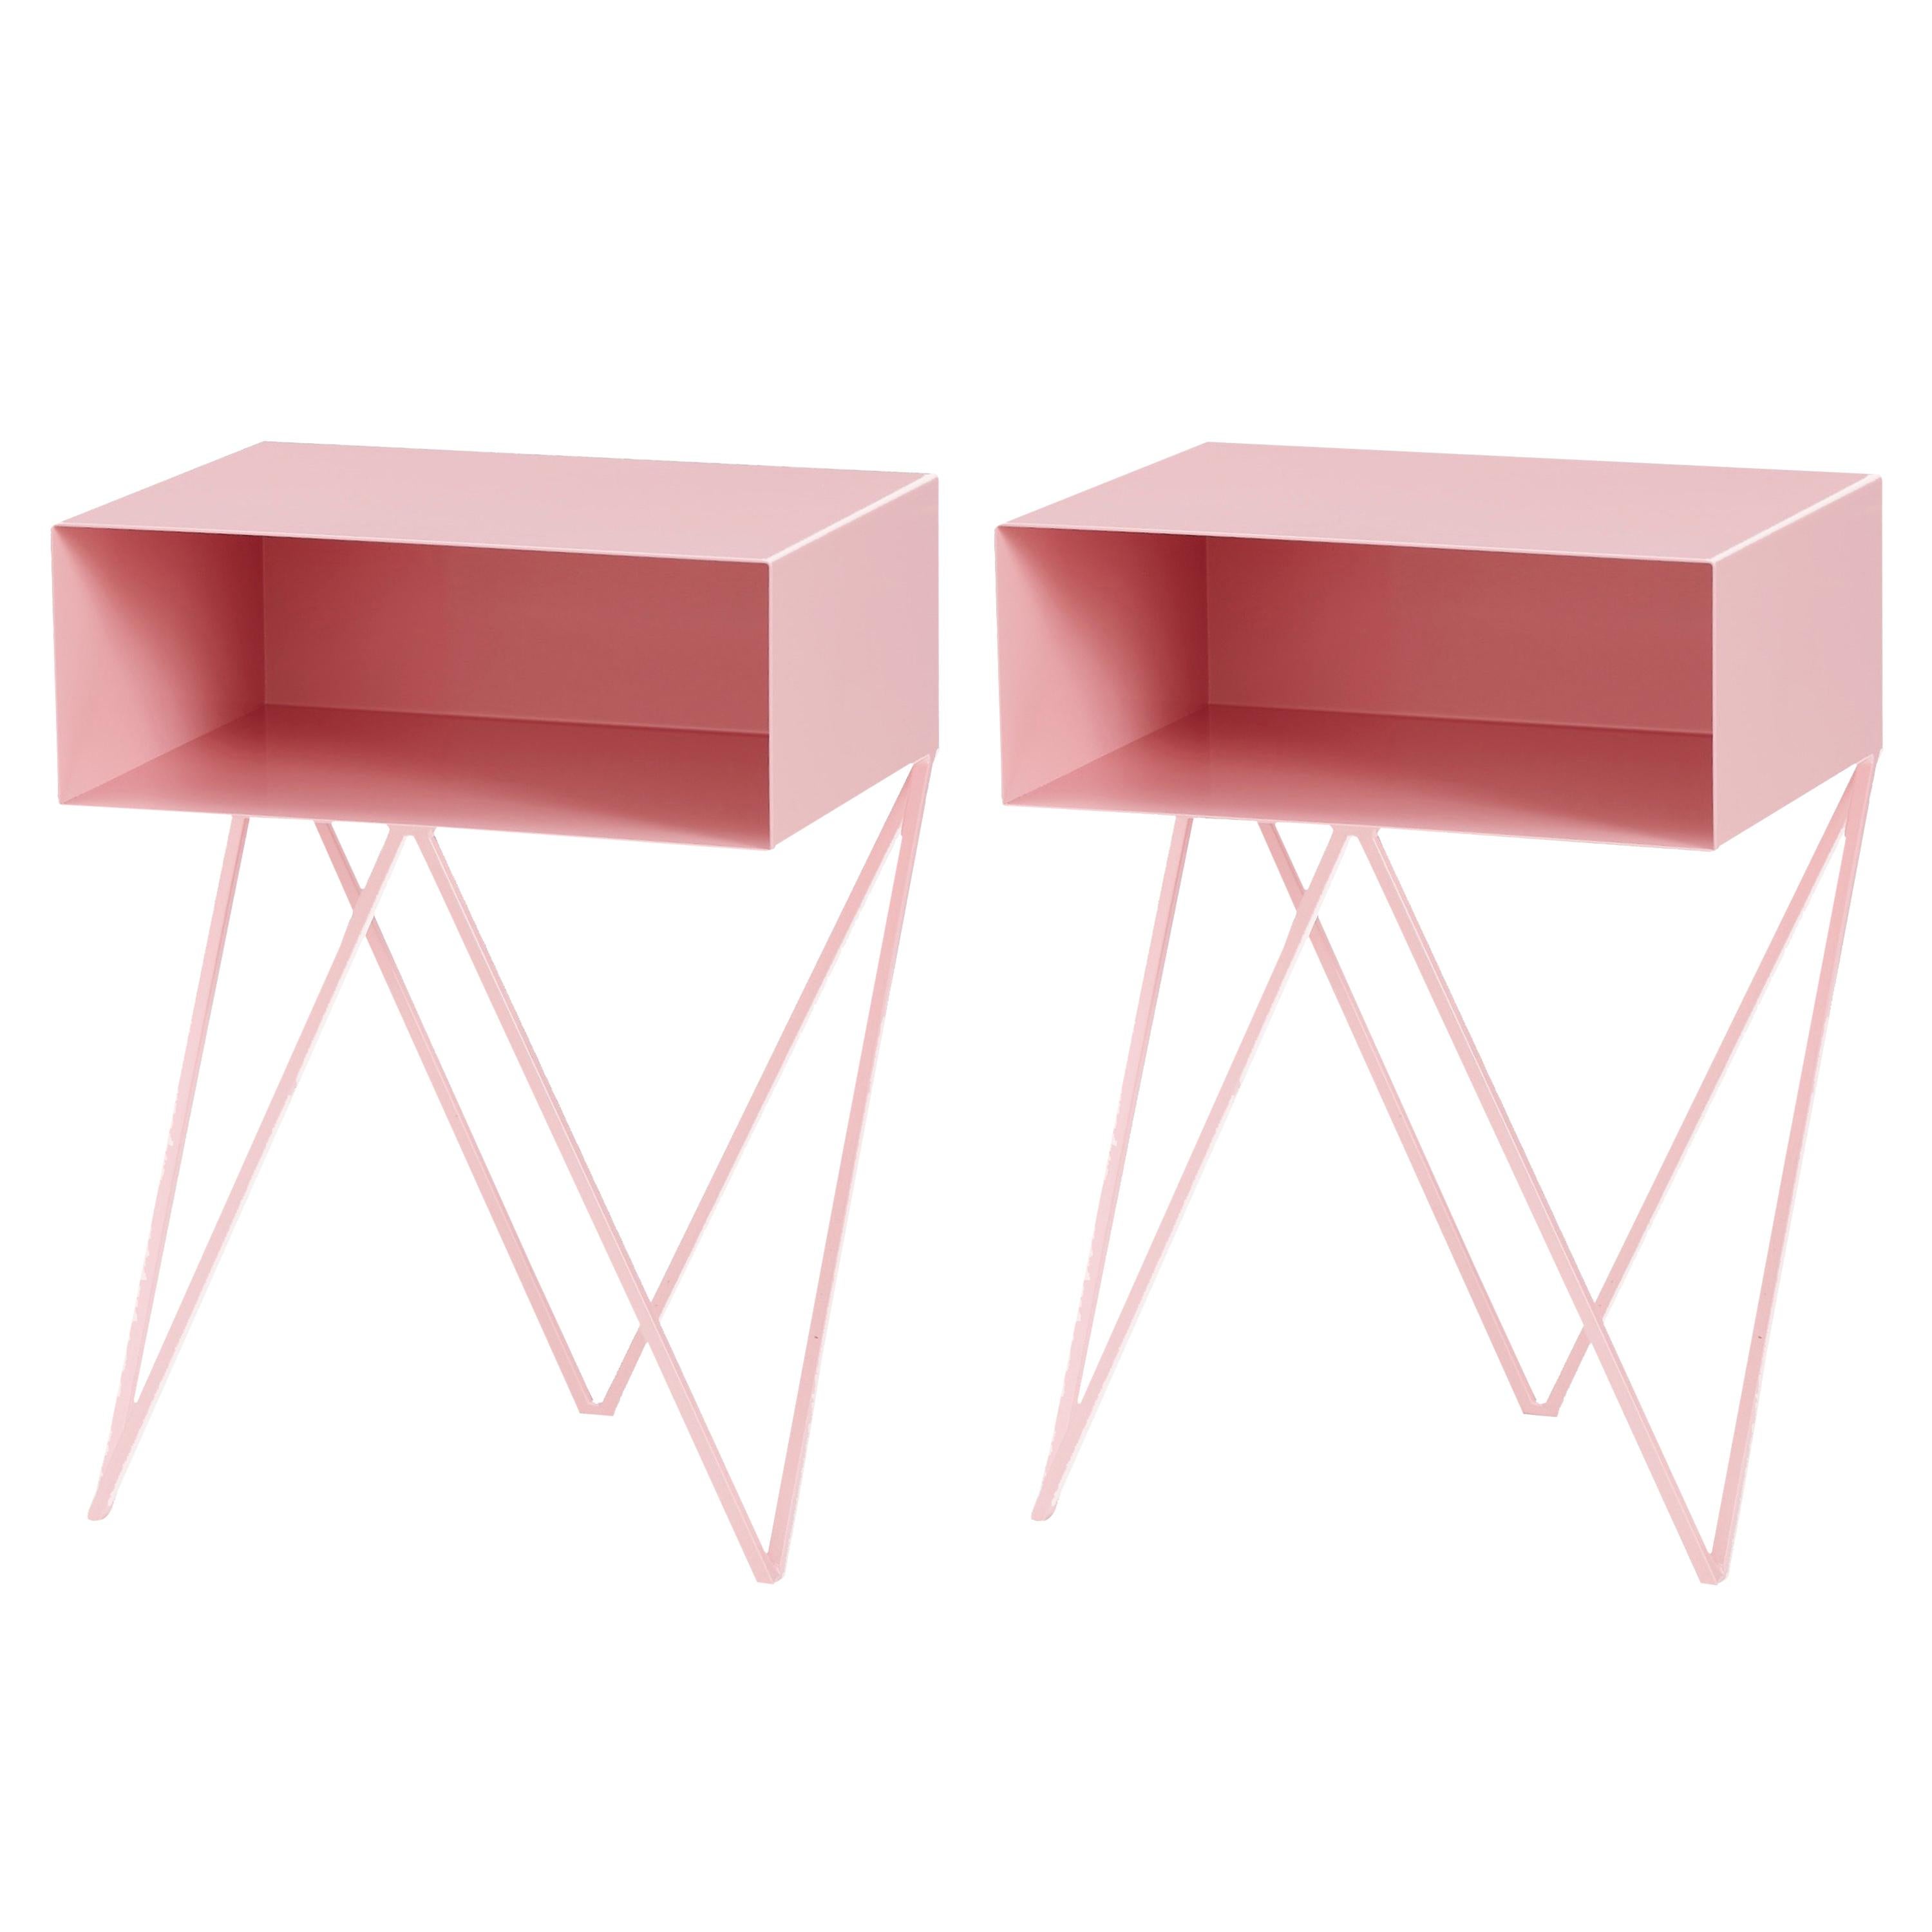 Pair of Pink Steel Robot Bedside Tables - Customisable Nightstands